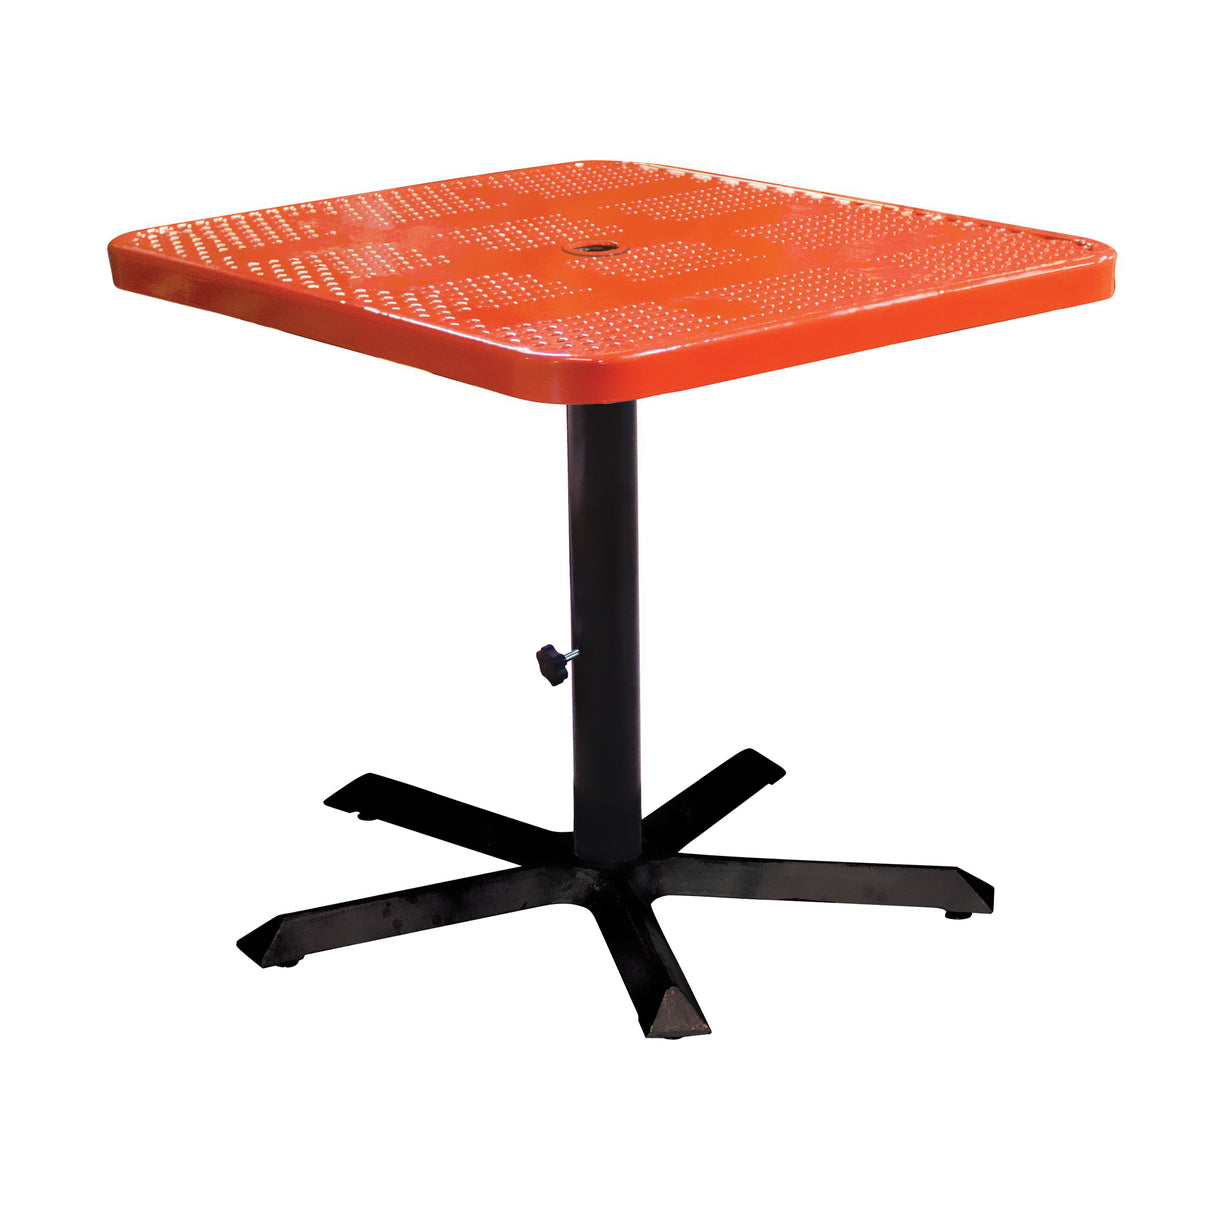 36˝ Square Perforated Pedestal Table